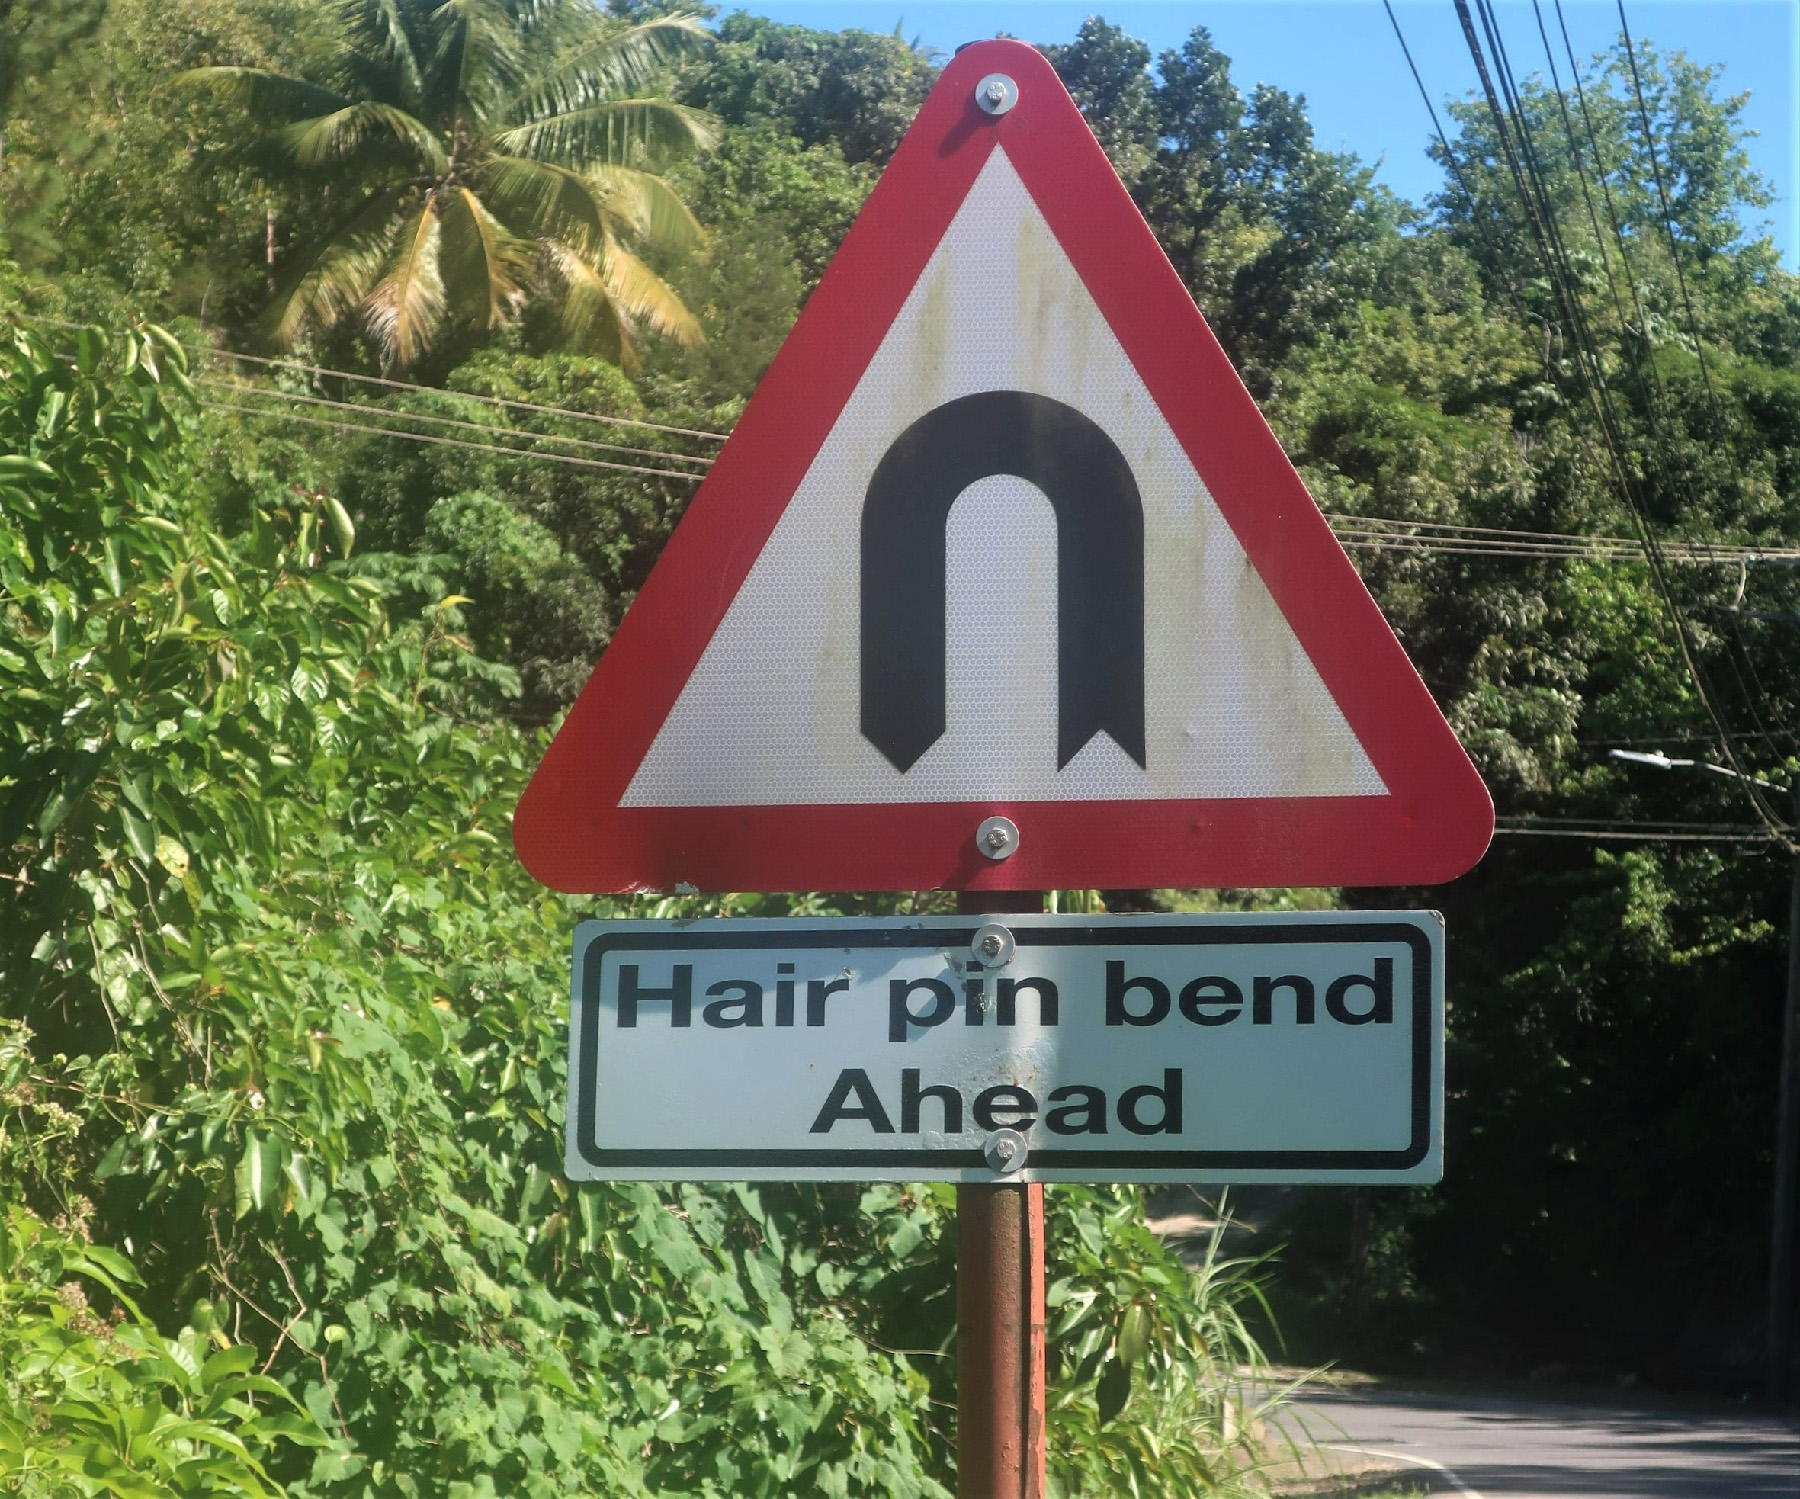 Signs warning of hairpin turns are frequent on roads in St. Lucia.